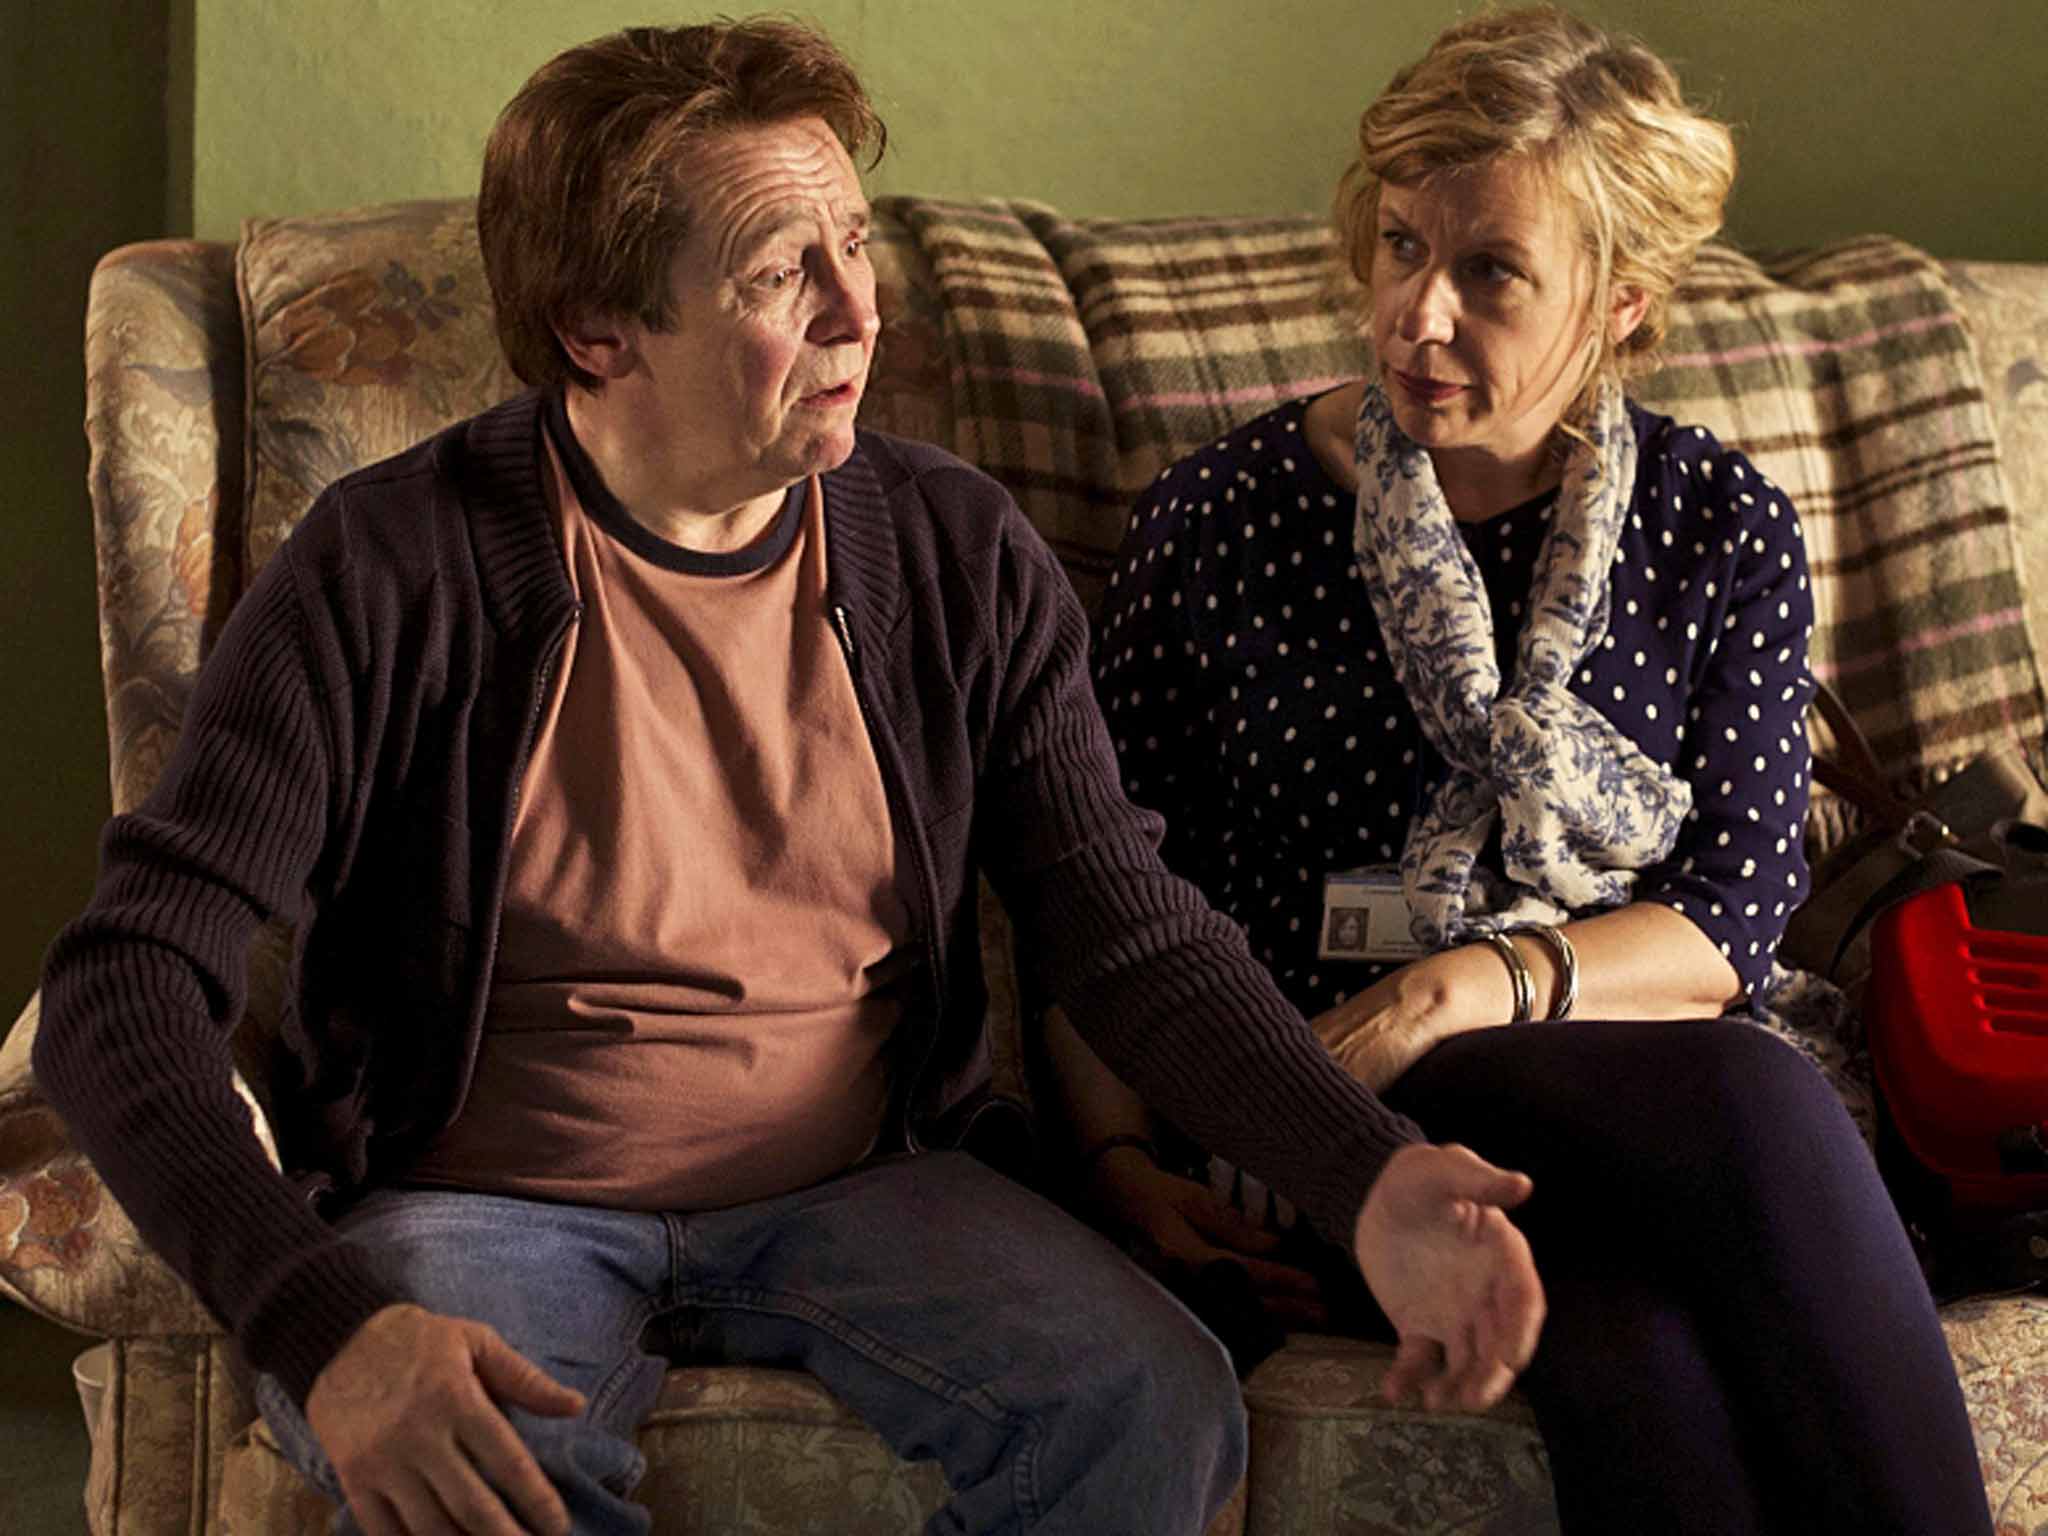 Dose of humour: Paul Whitehouse and Esther Coles in 'Nurse'